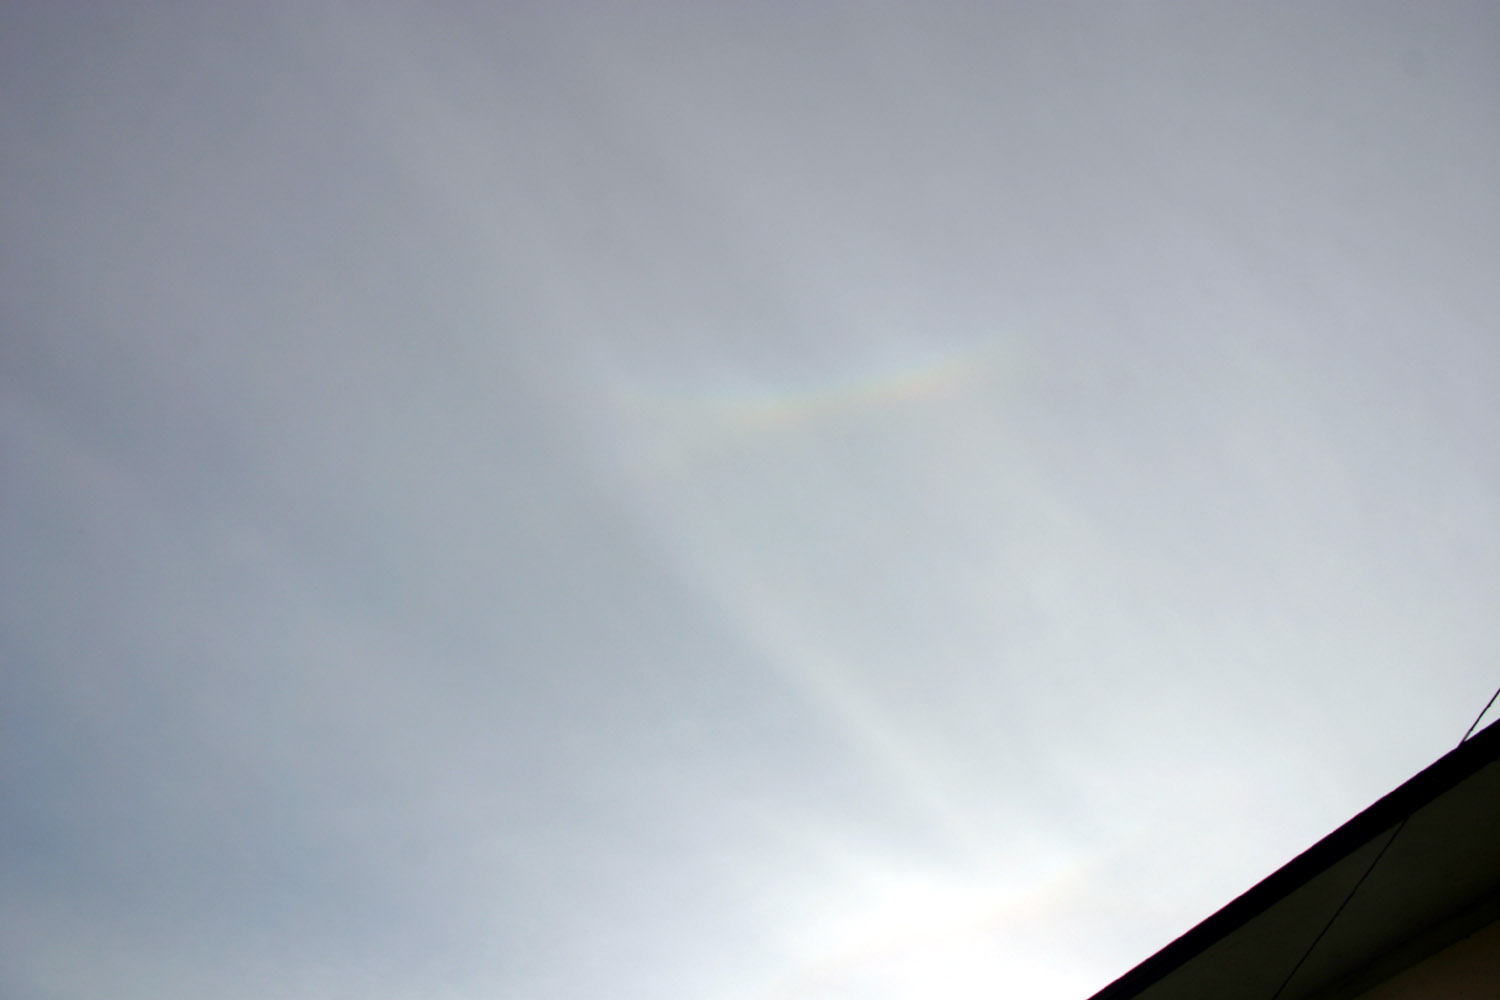 Upper tangent arc with circumzenithal arc: 91 KB; click on the image to enlarge